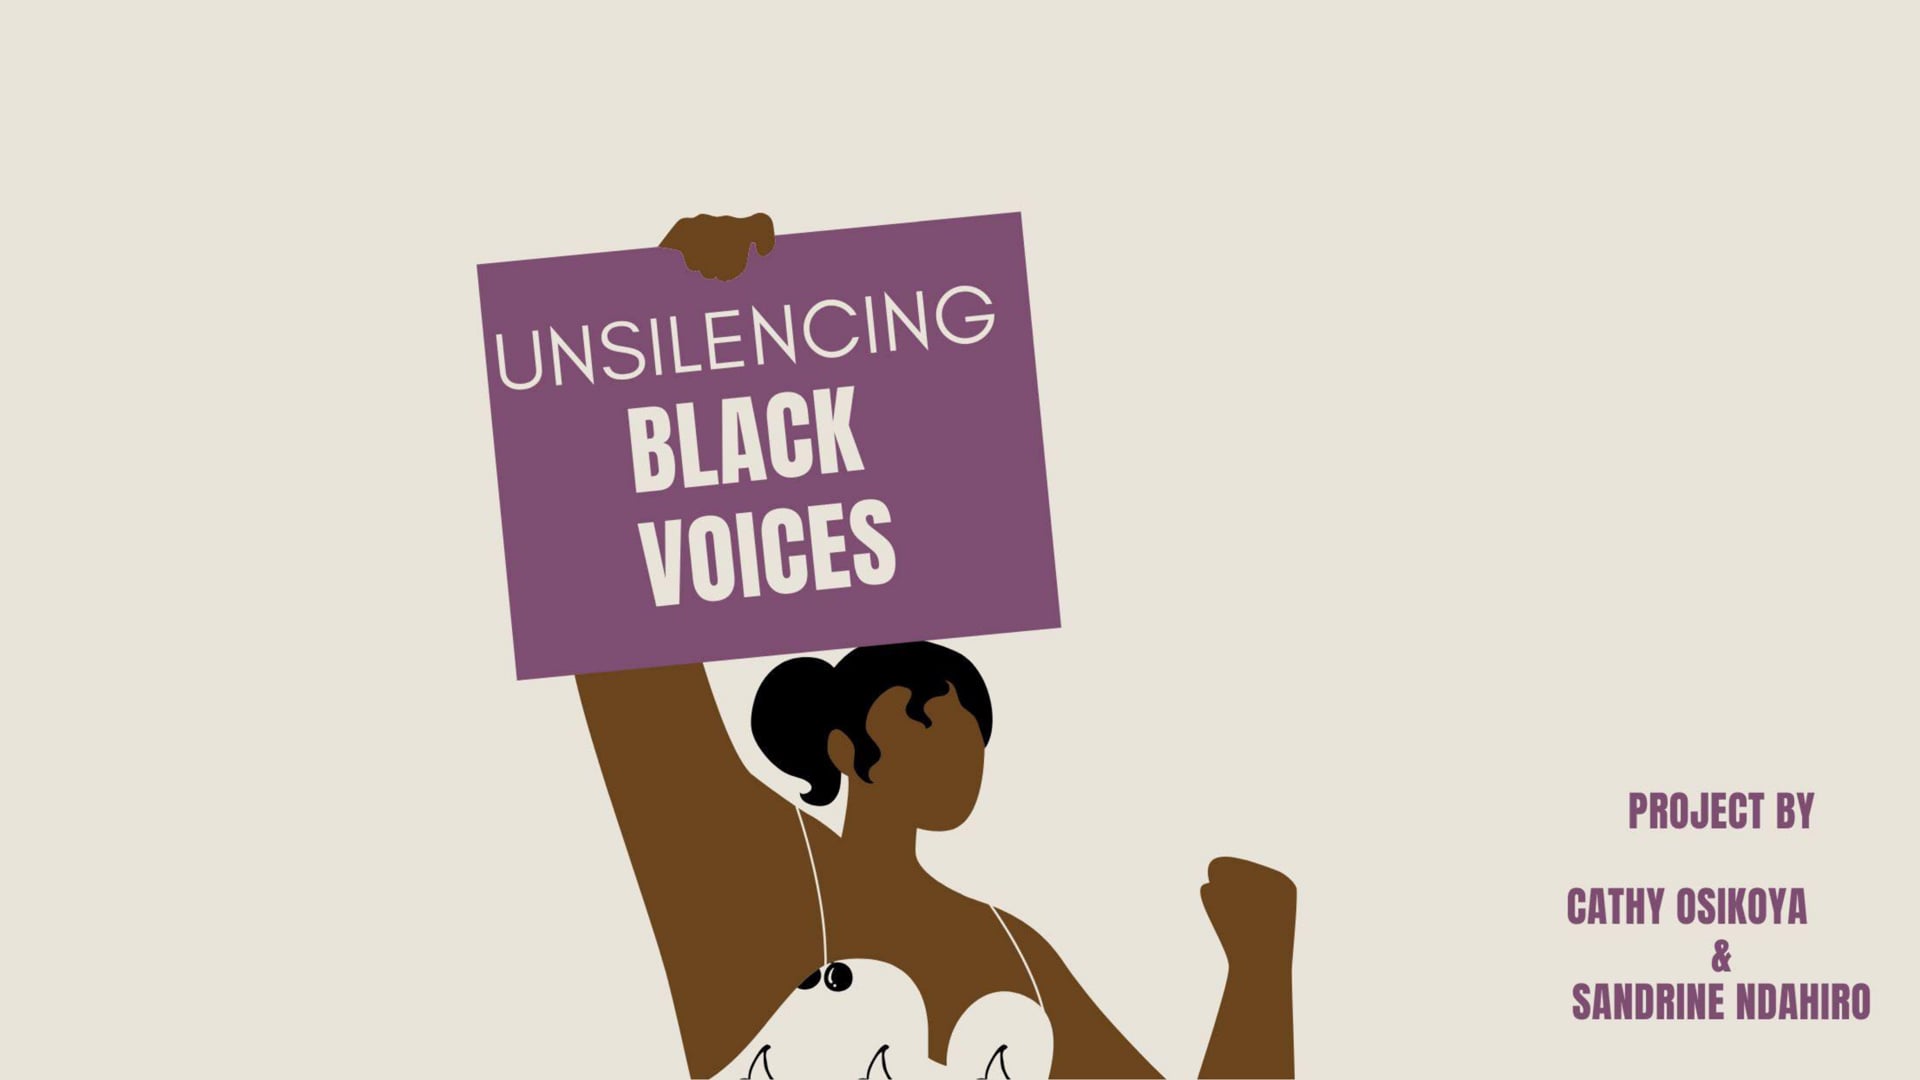 UNSILENCING BLACK VOICES DOCUMENTARY